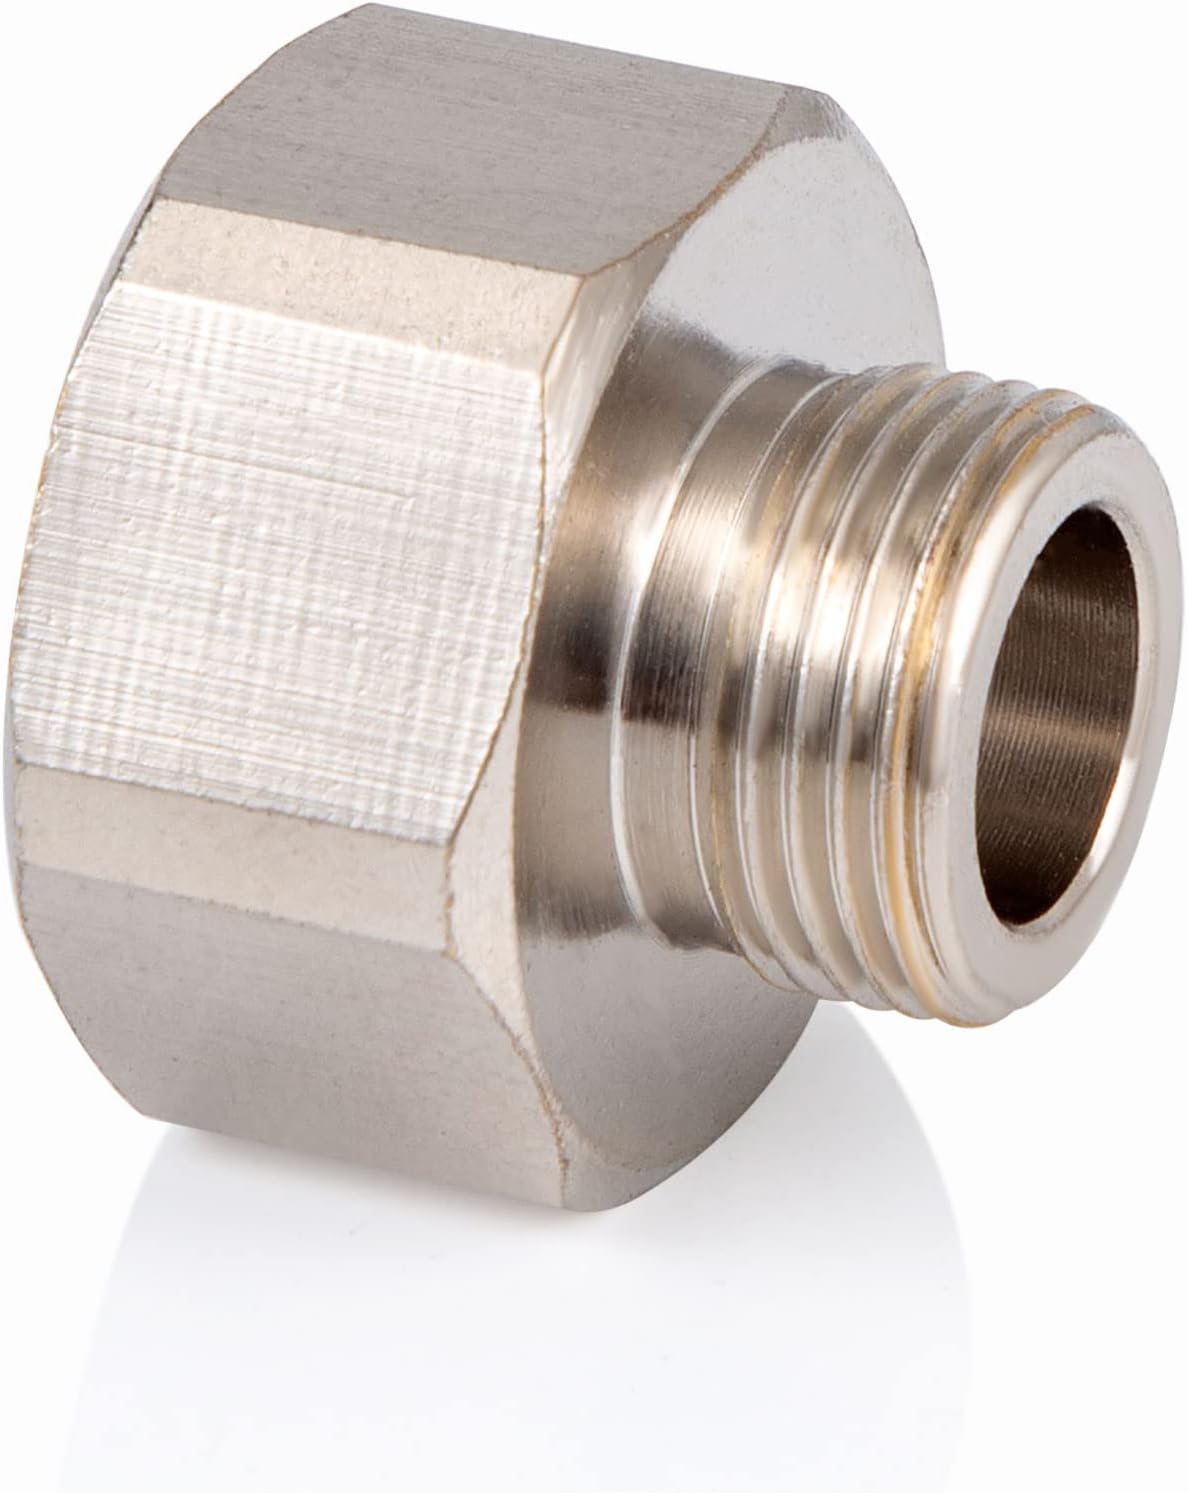 Reducer Pipe Adapter 1/2 Female Npt to 3/8 Male Npt Brass Fitting